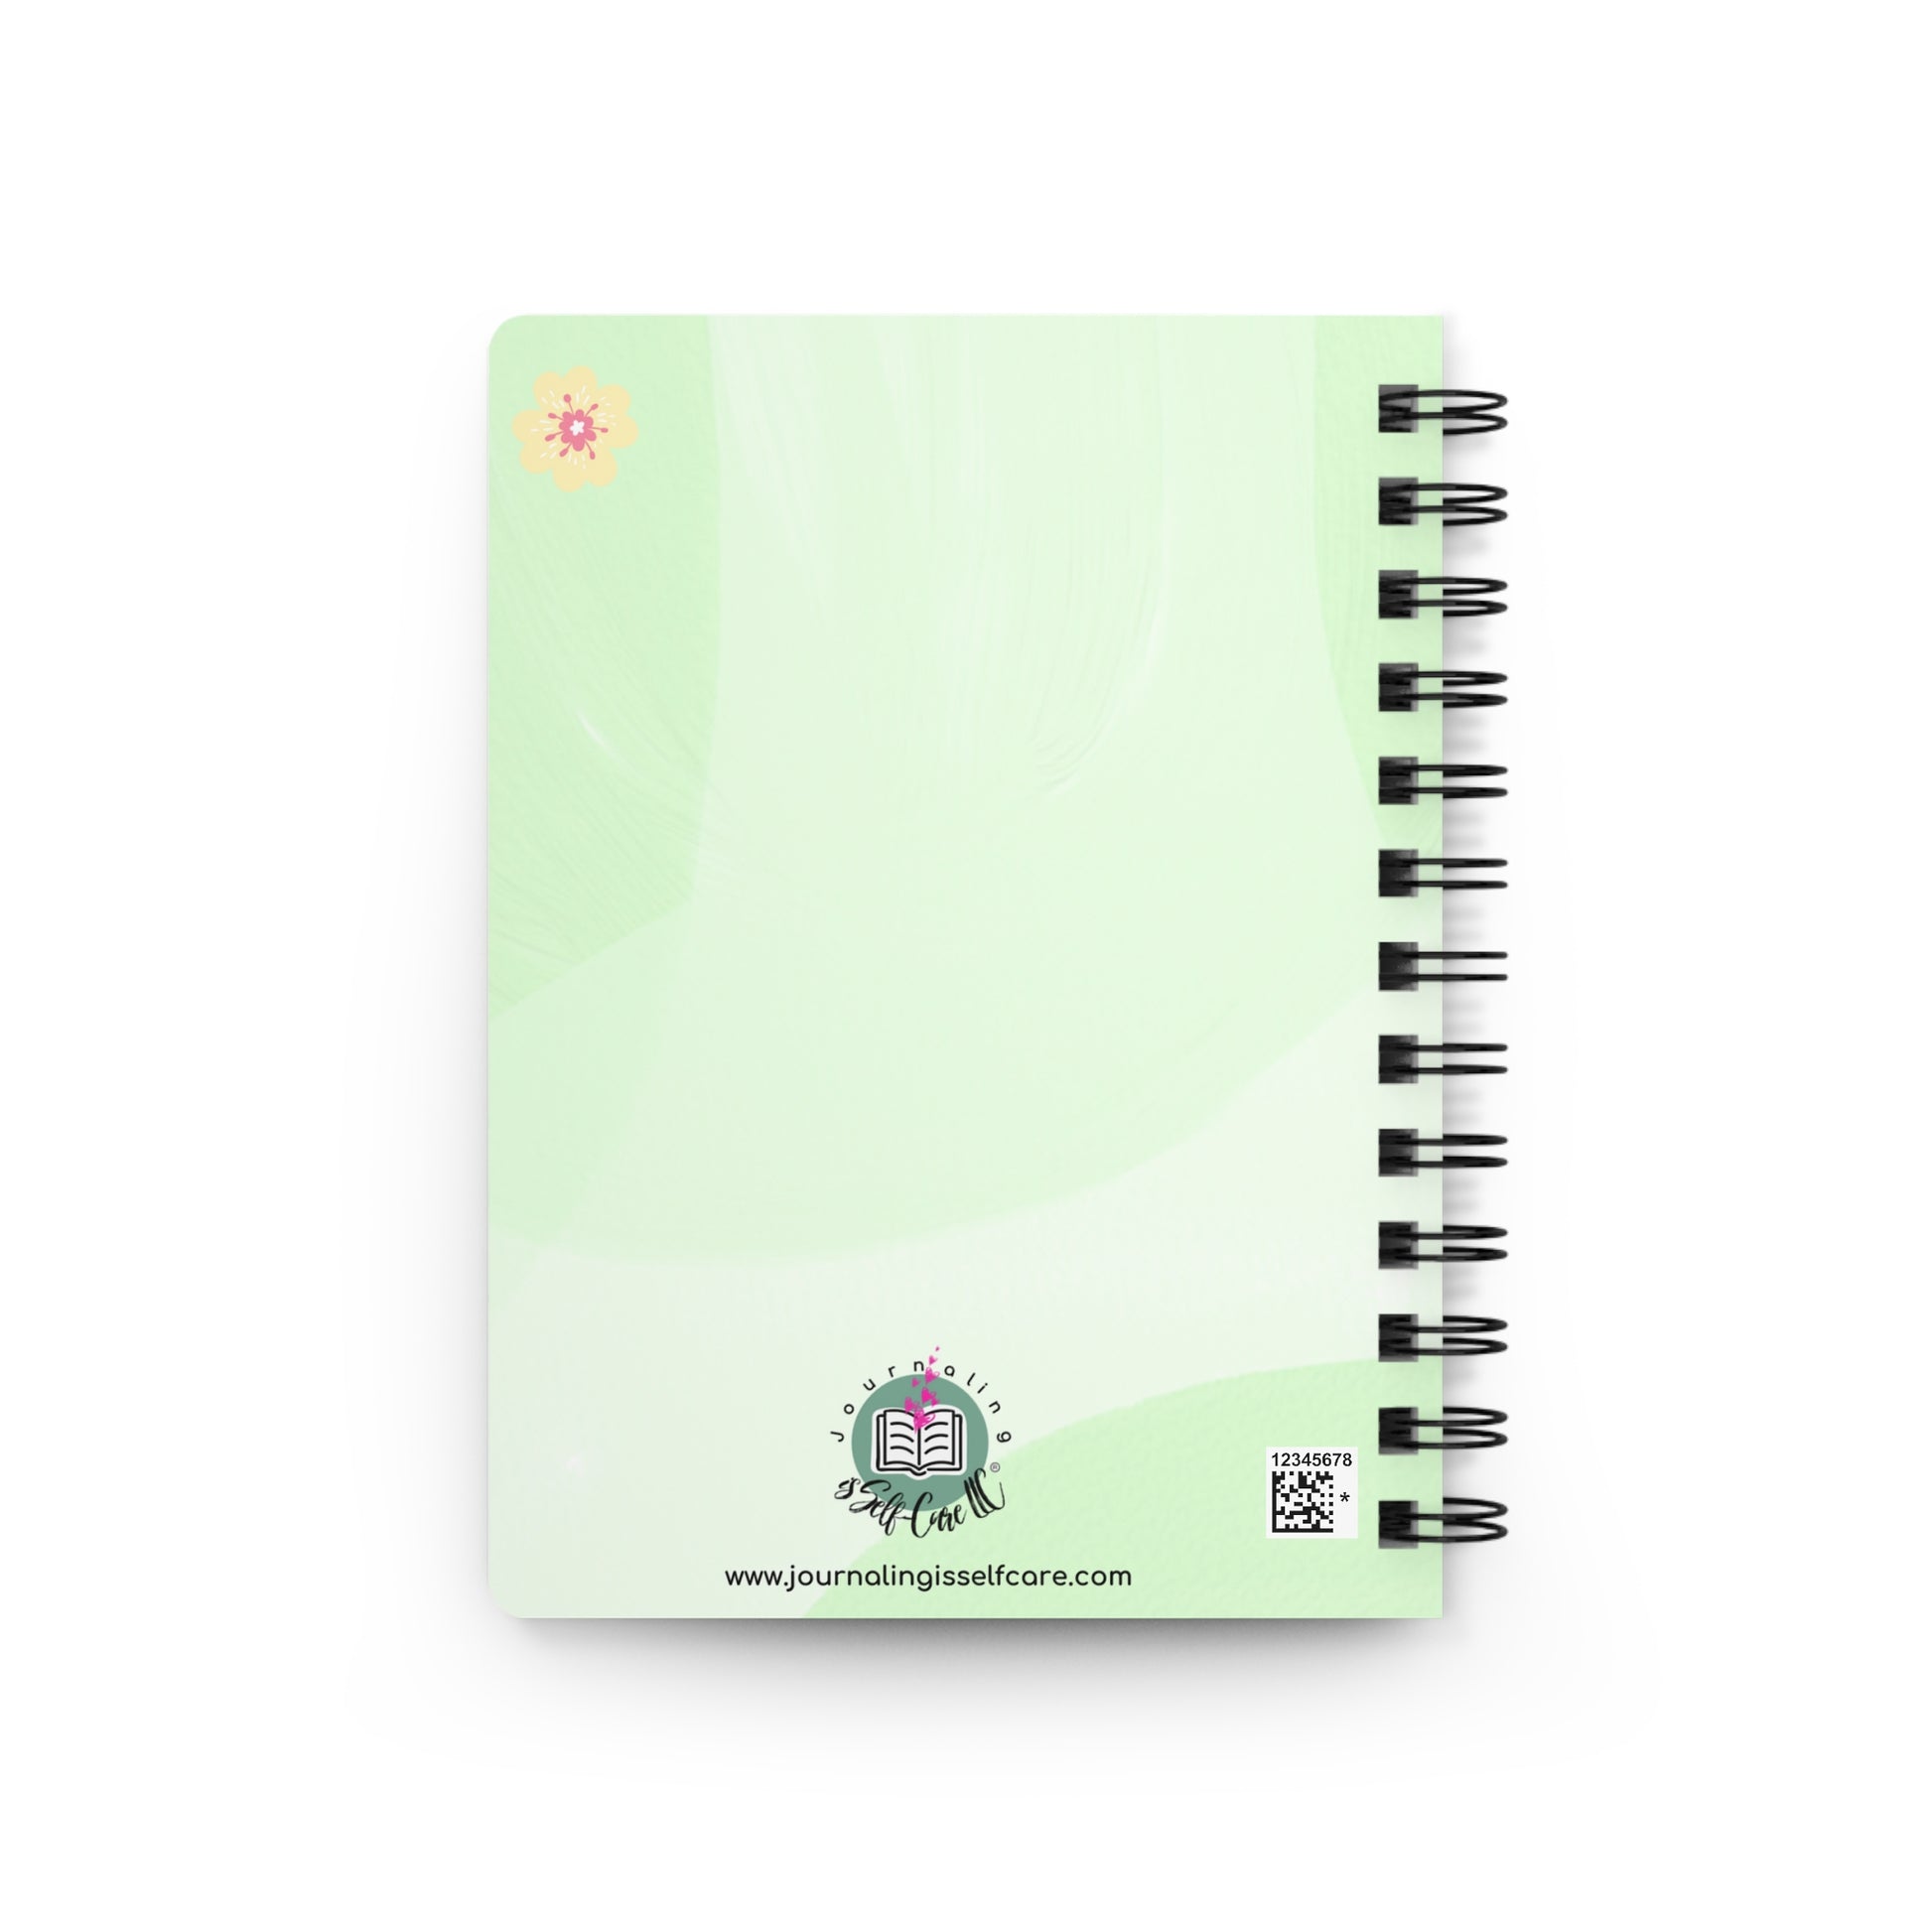 A "Growth Mindset" Inspirational Journal for Success and Self Improvement, perfect for reflective journaling and fostering emotional intelligence.